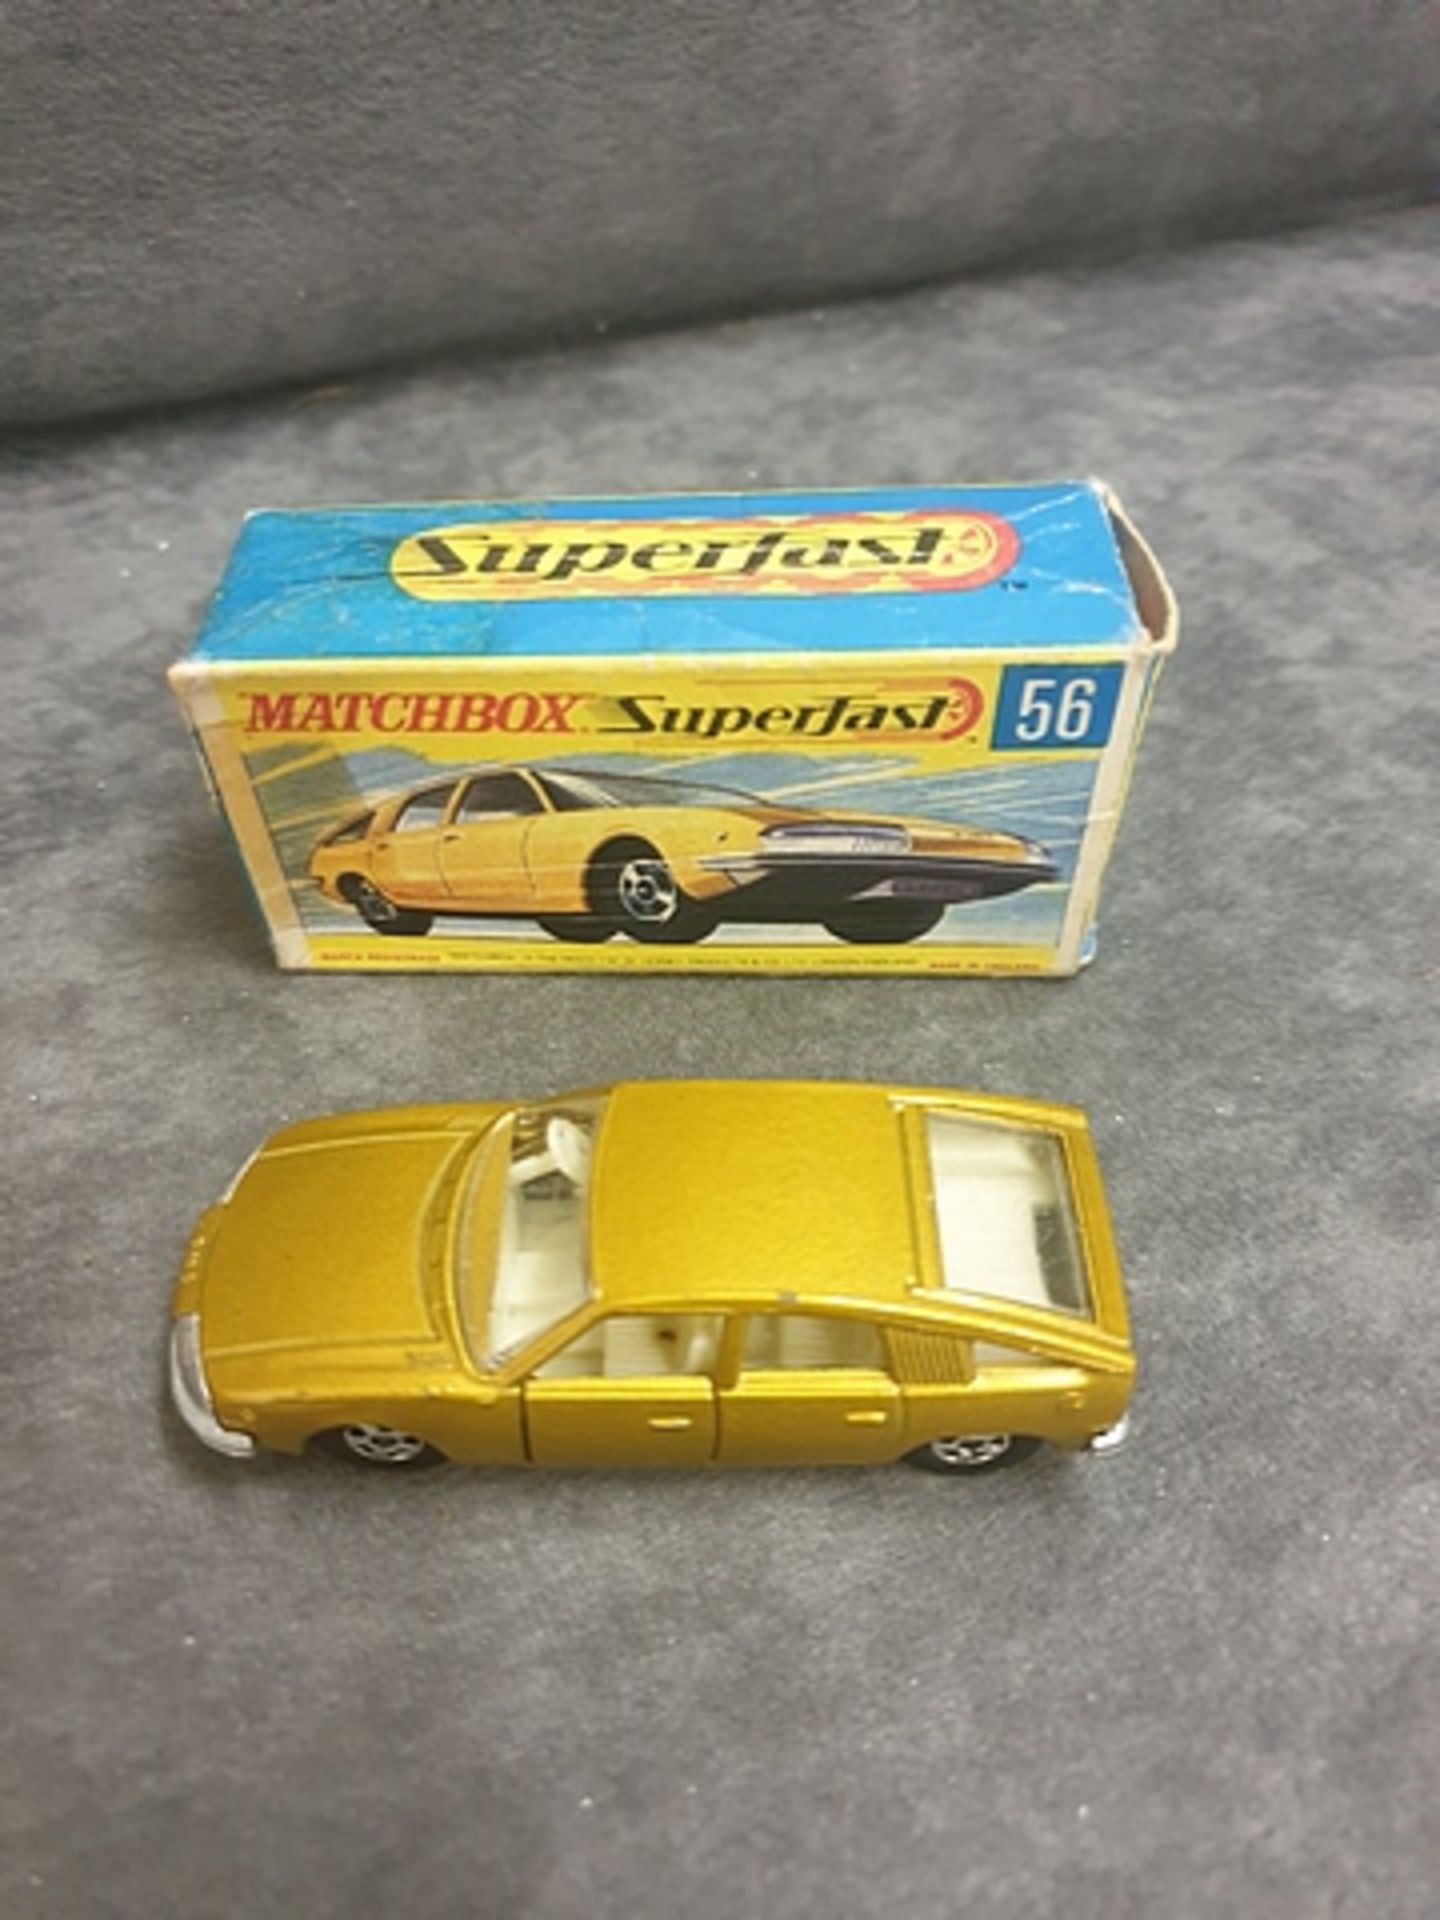 3x Matchbox Superfast Diecast Cars #56 2x Gold In Boxes One With End Flap Missing 1x Orange In - Image 4 of 4